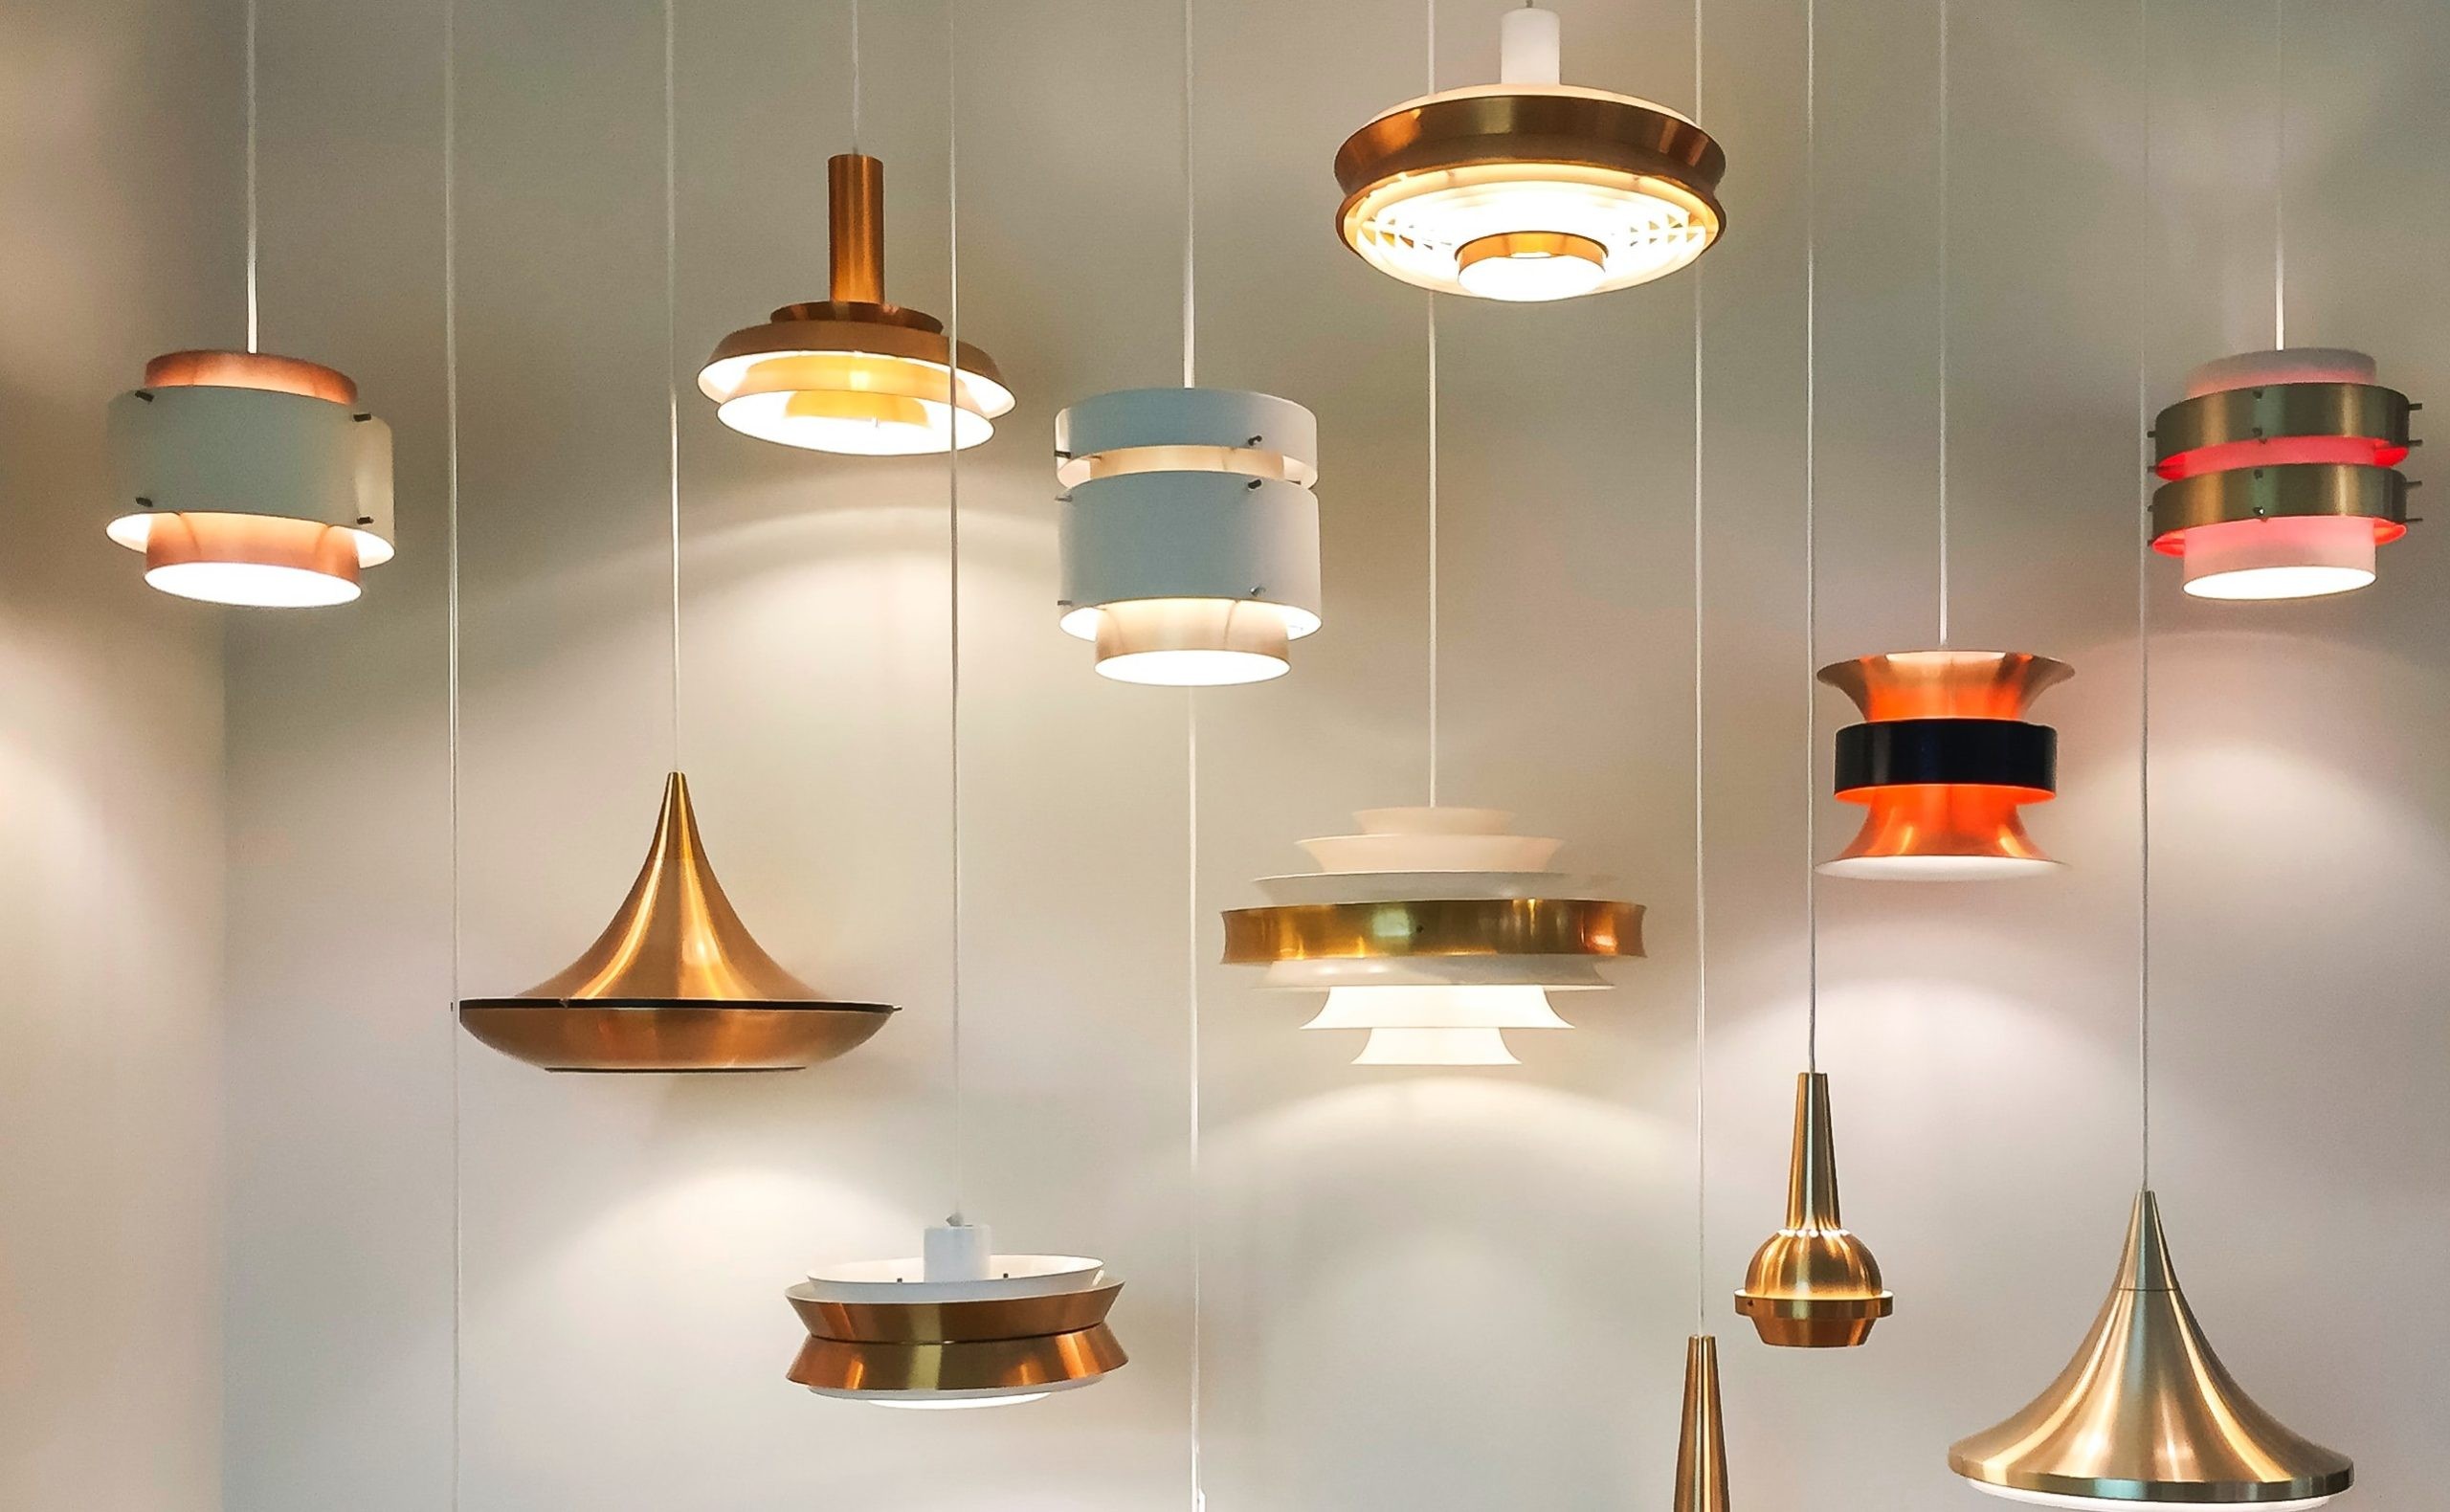 Lighting trends 2022 – see the beautiful designs set to brighten our homes next year